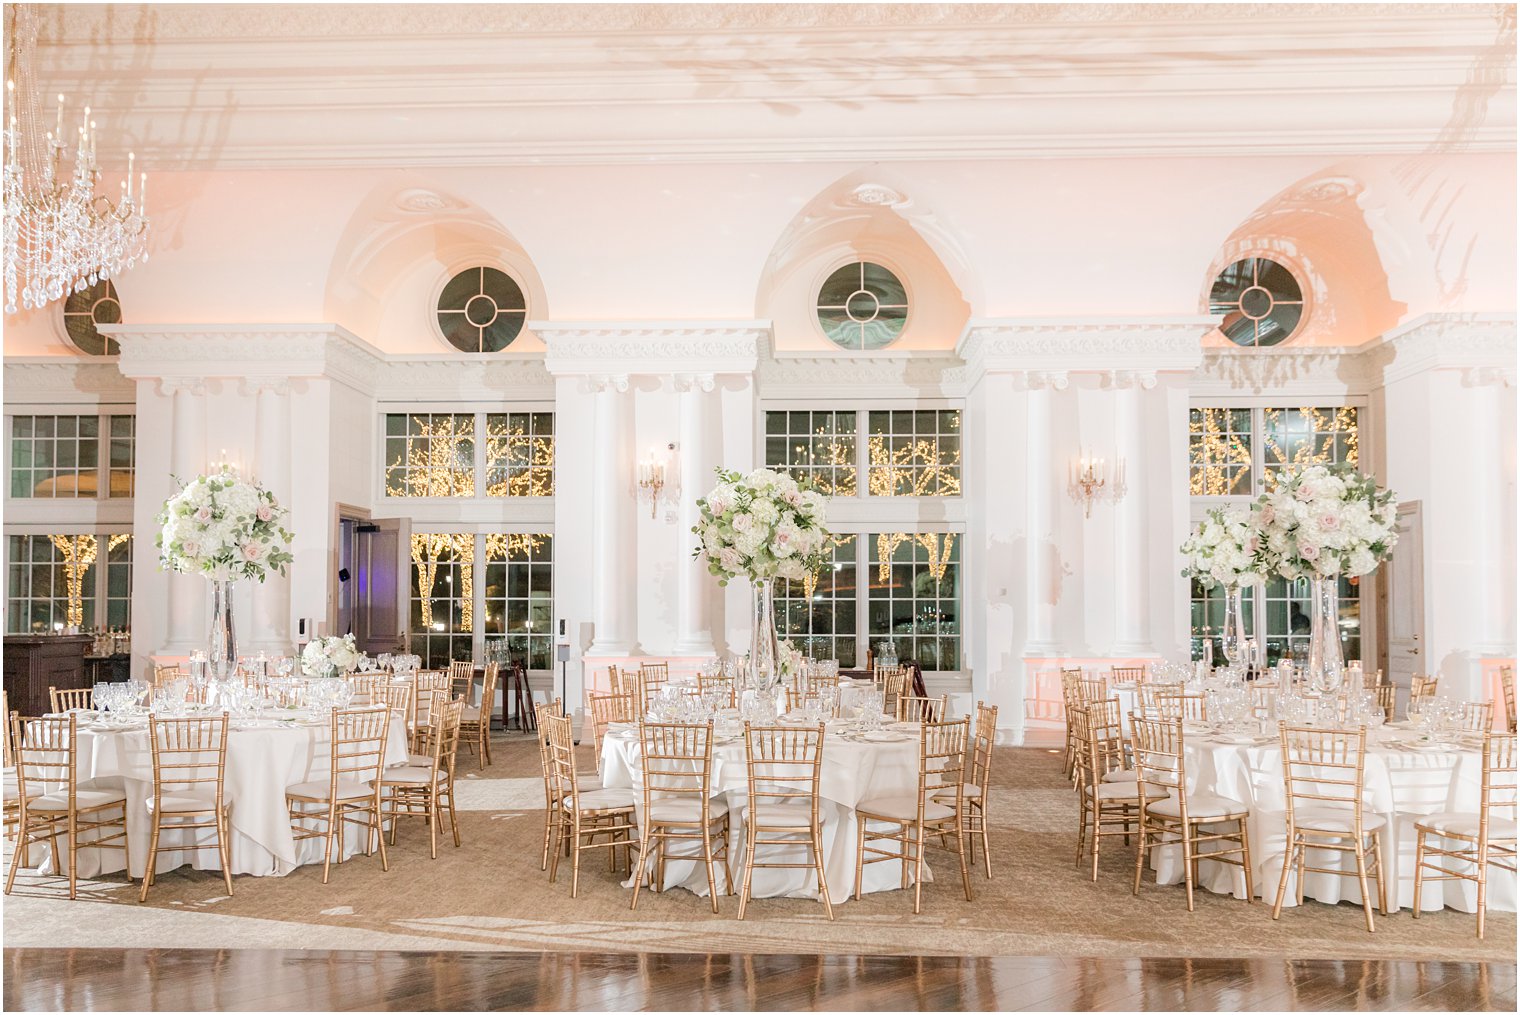 Park Chateau winter wedding reception with tall floral displays 